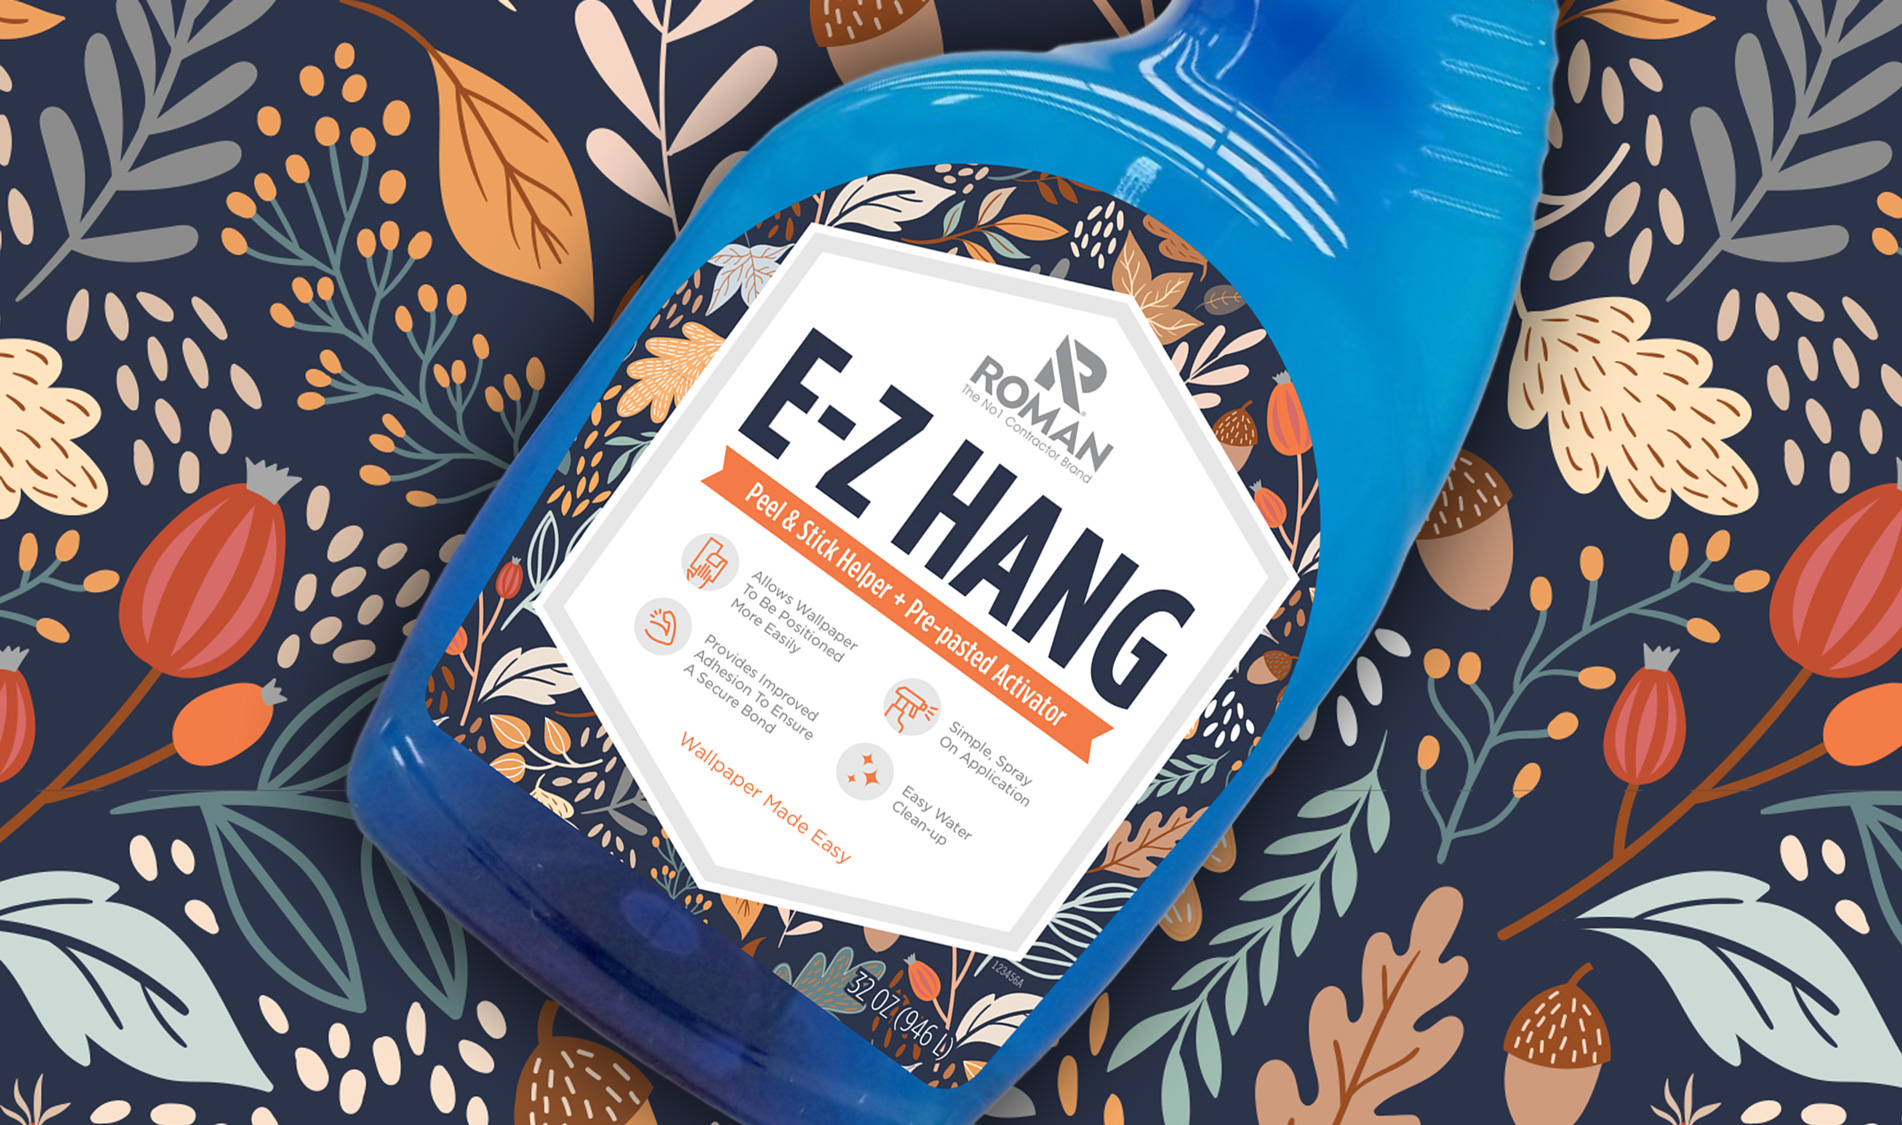 E-Z Hang Peel & Stick Helper + Pre-pasted Activator - Features